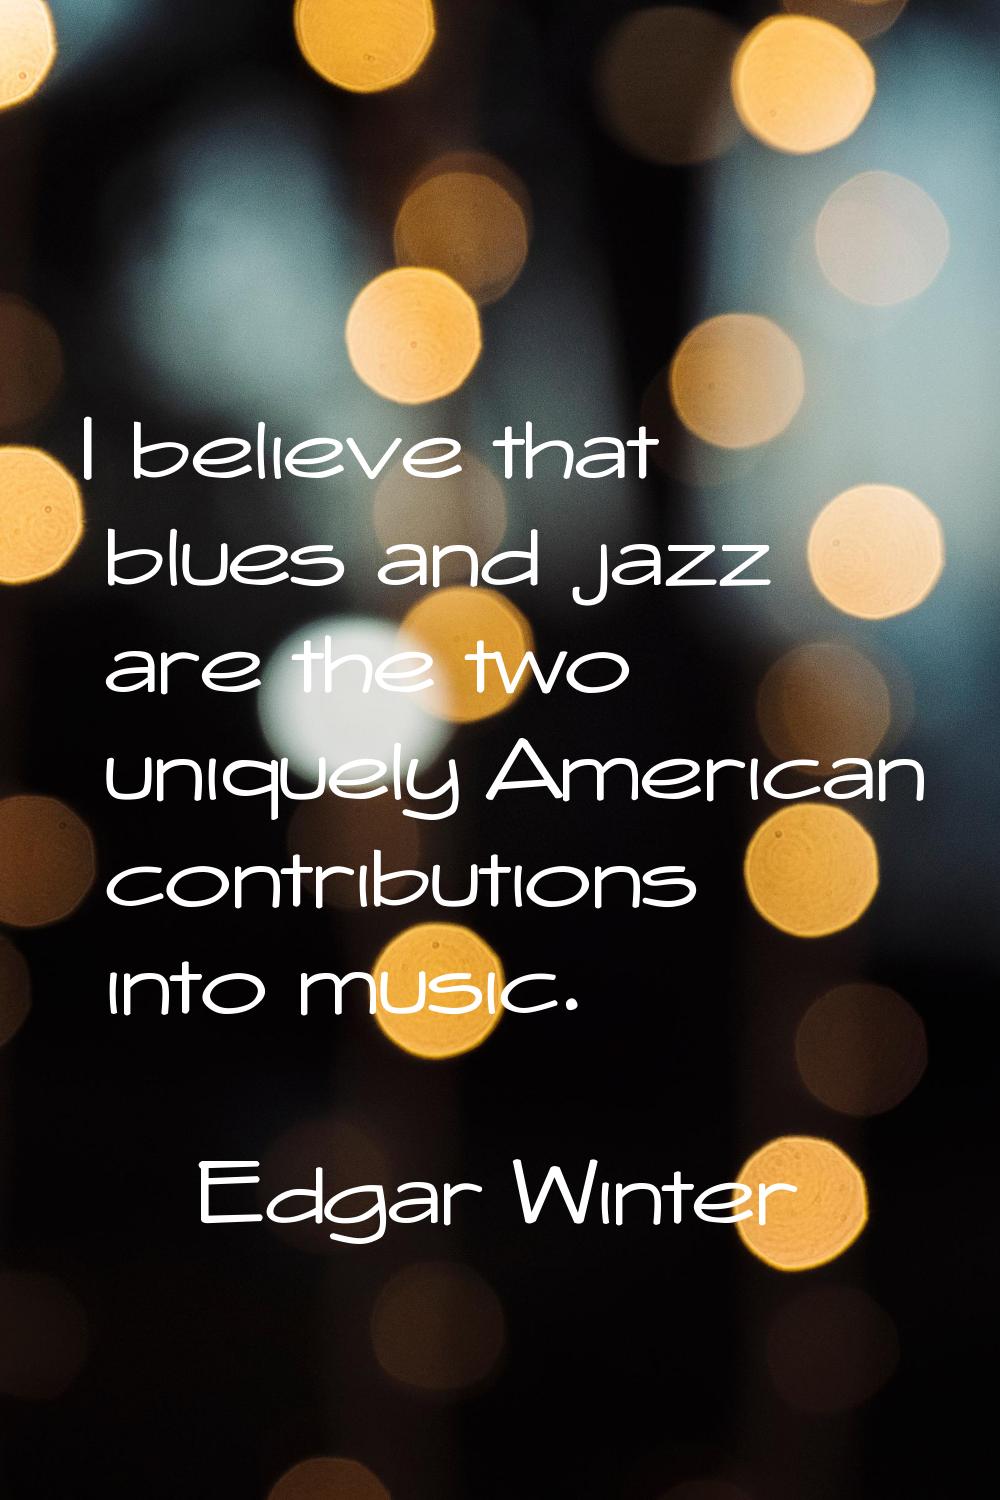 I believe that blues and jazz are the two uniquely American contributions into music.